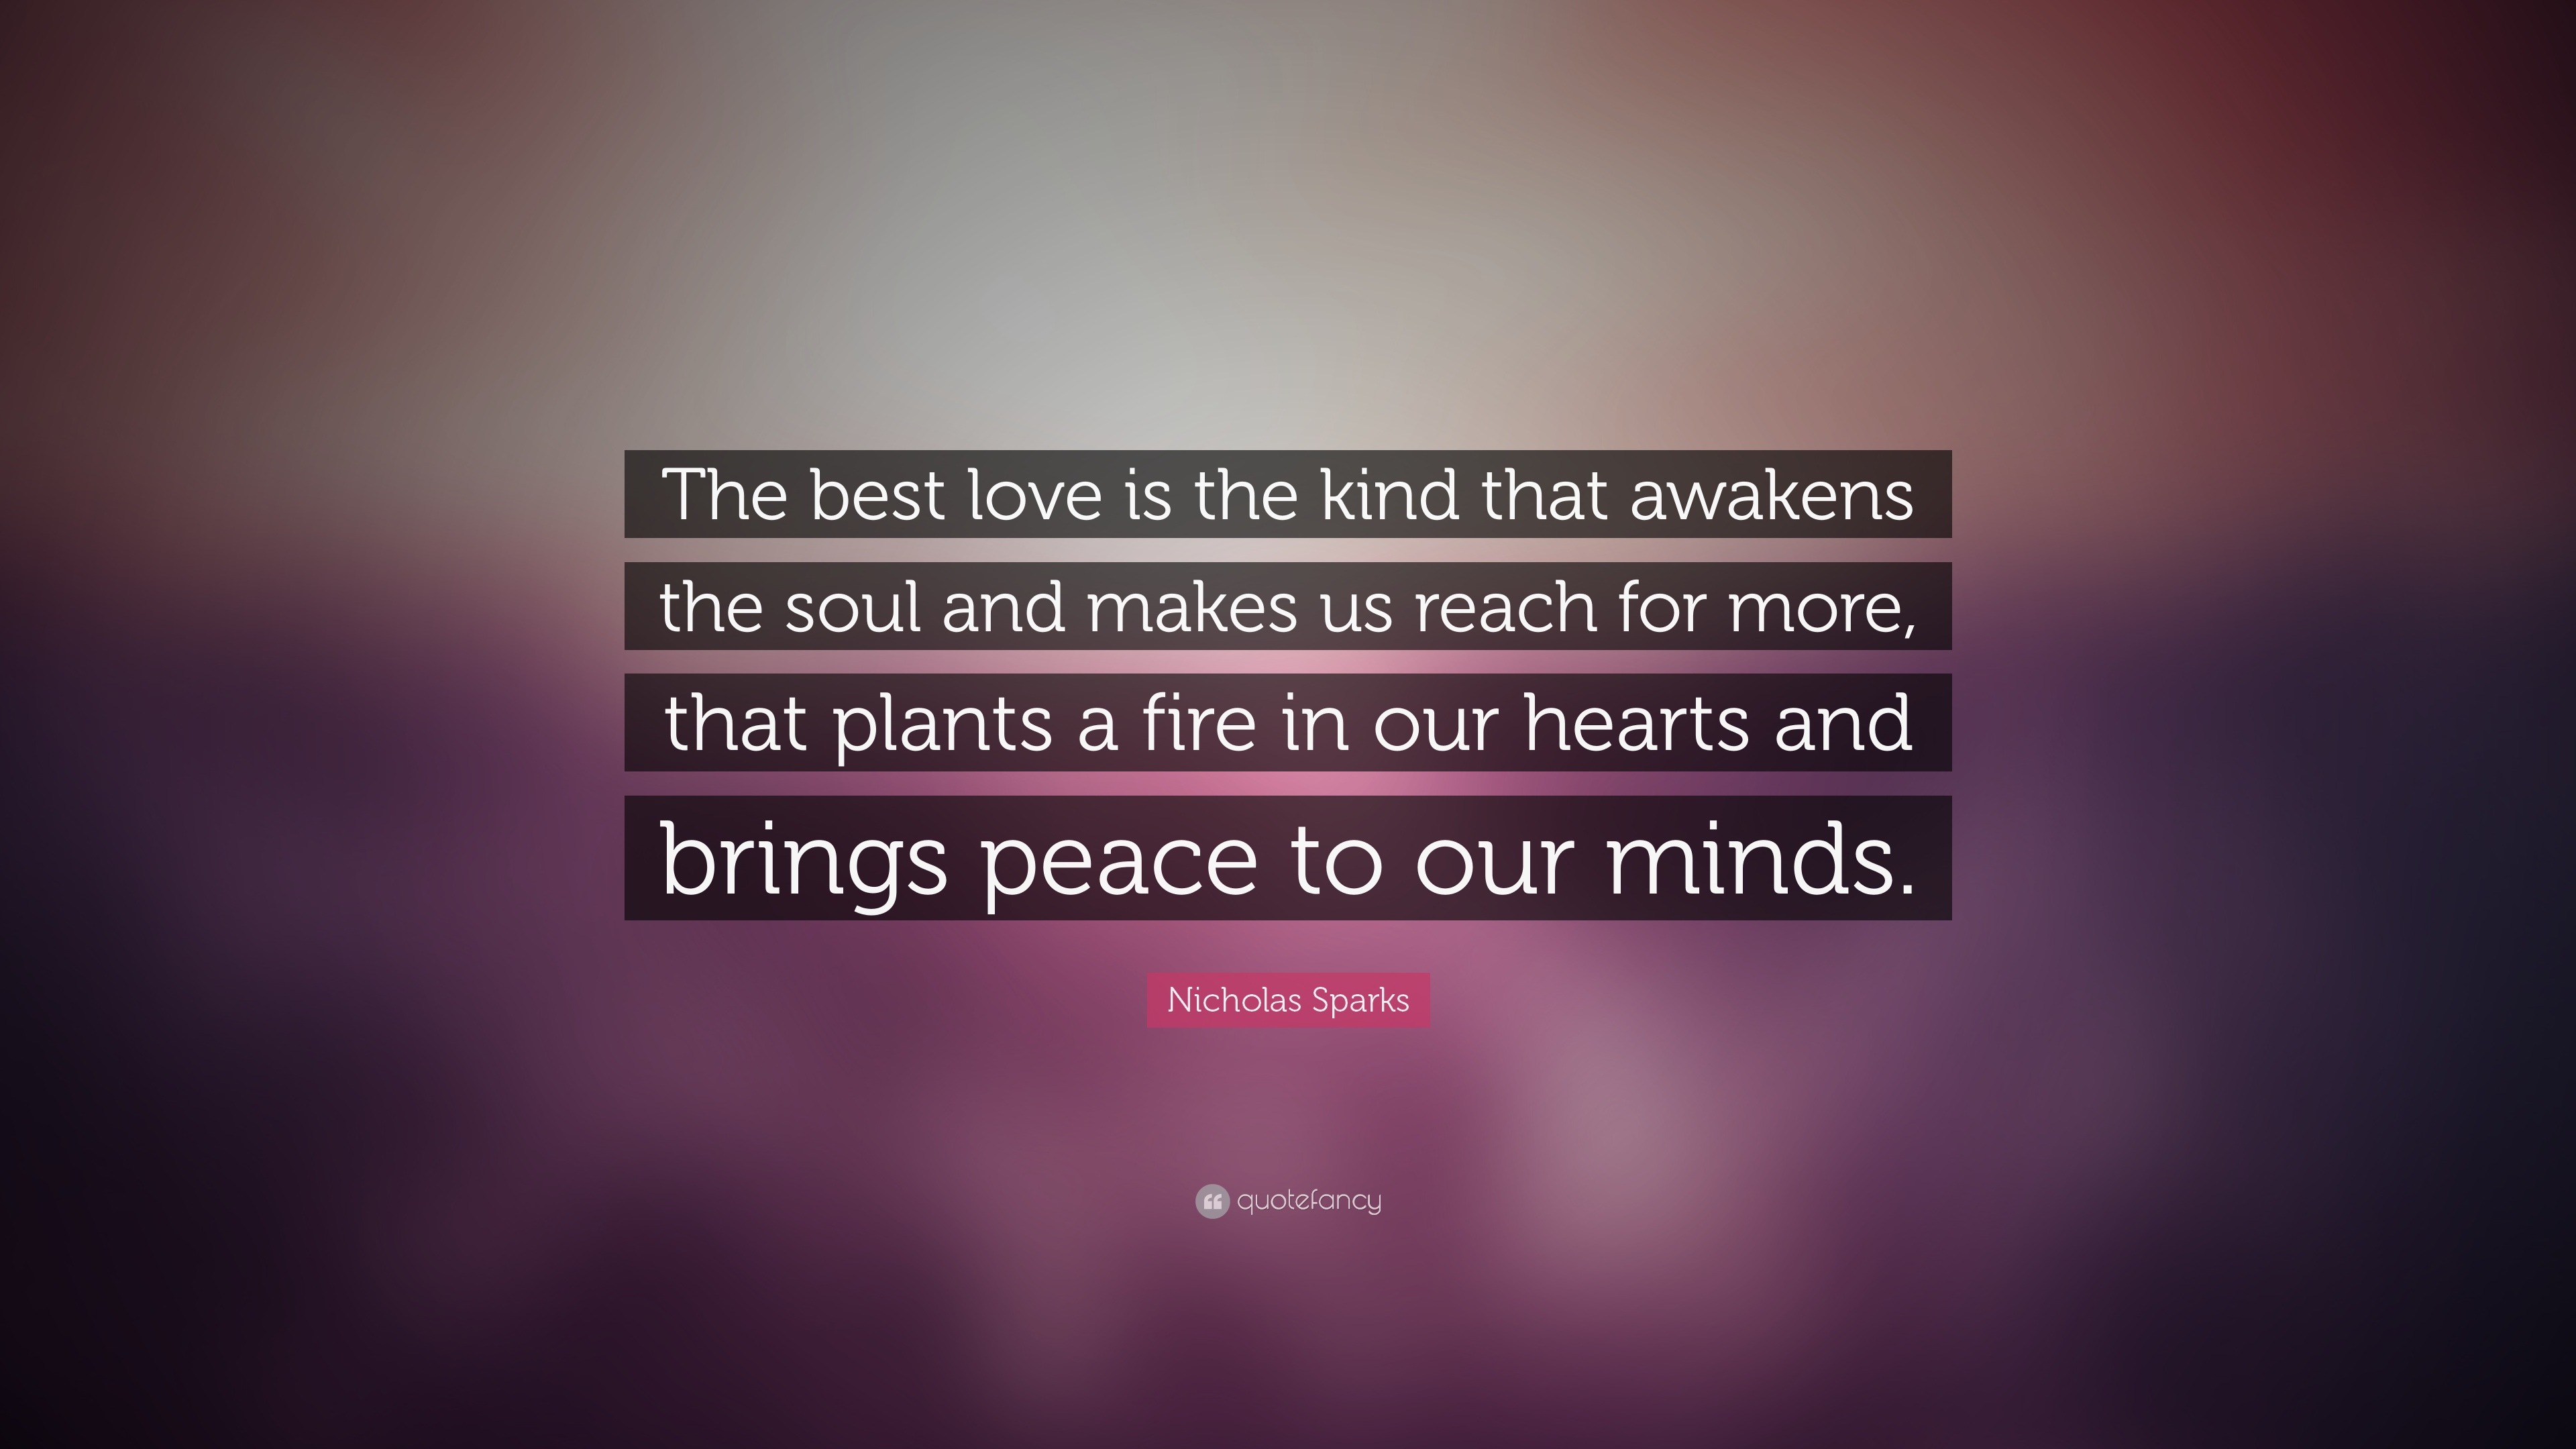 Nicholas Sparks Quote “The best love is the kind that awakens the soul and